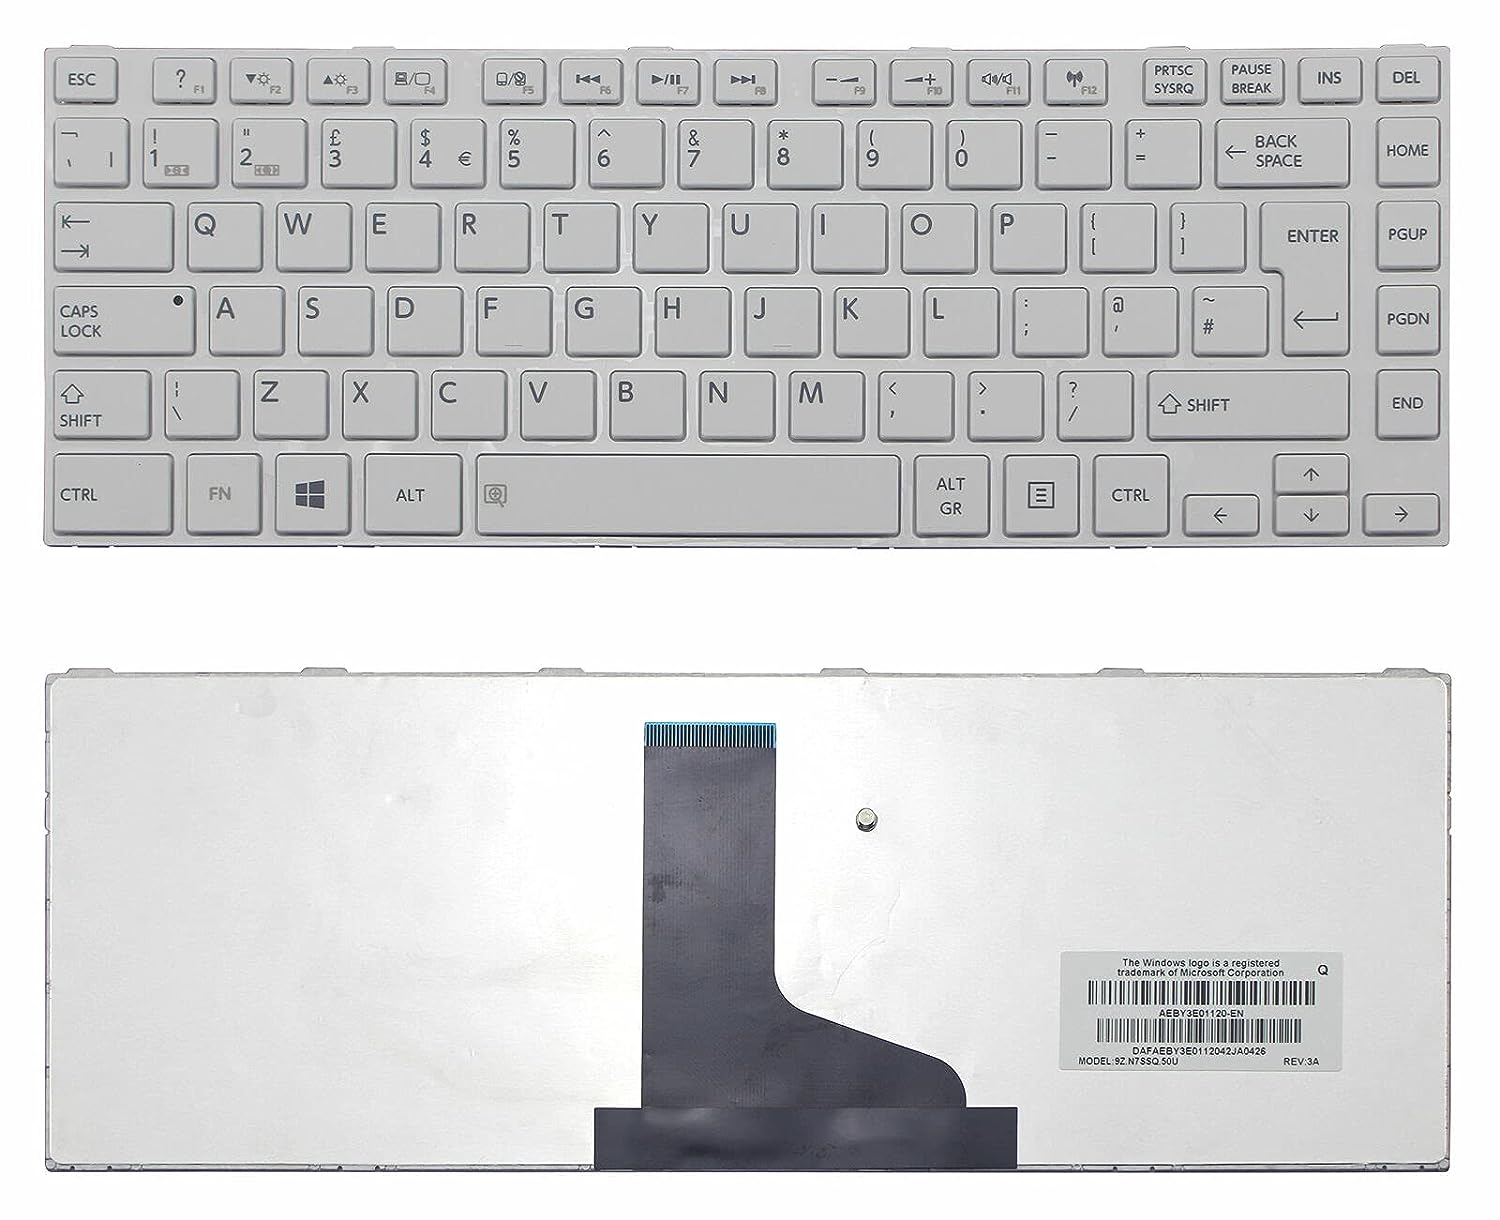 WISTAR Laptop Keyboard Compatible for Toshiba Satellite C800 C800D C805 C840 C840D C845 C845D MP-11B83US-920 AEBY3U00030 Series (White)